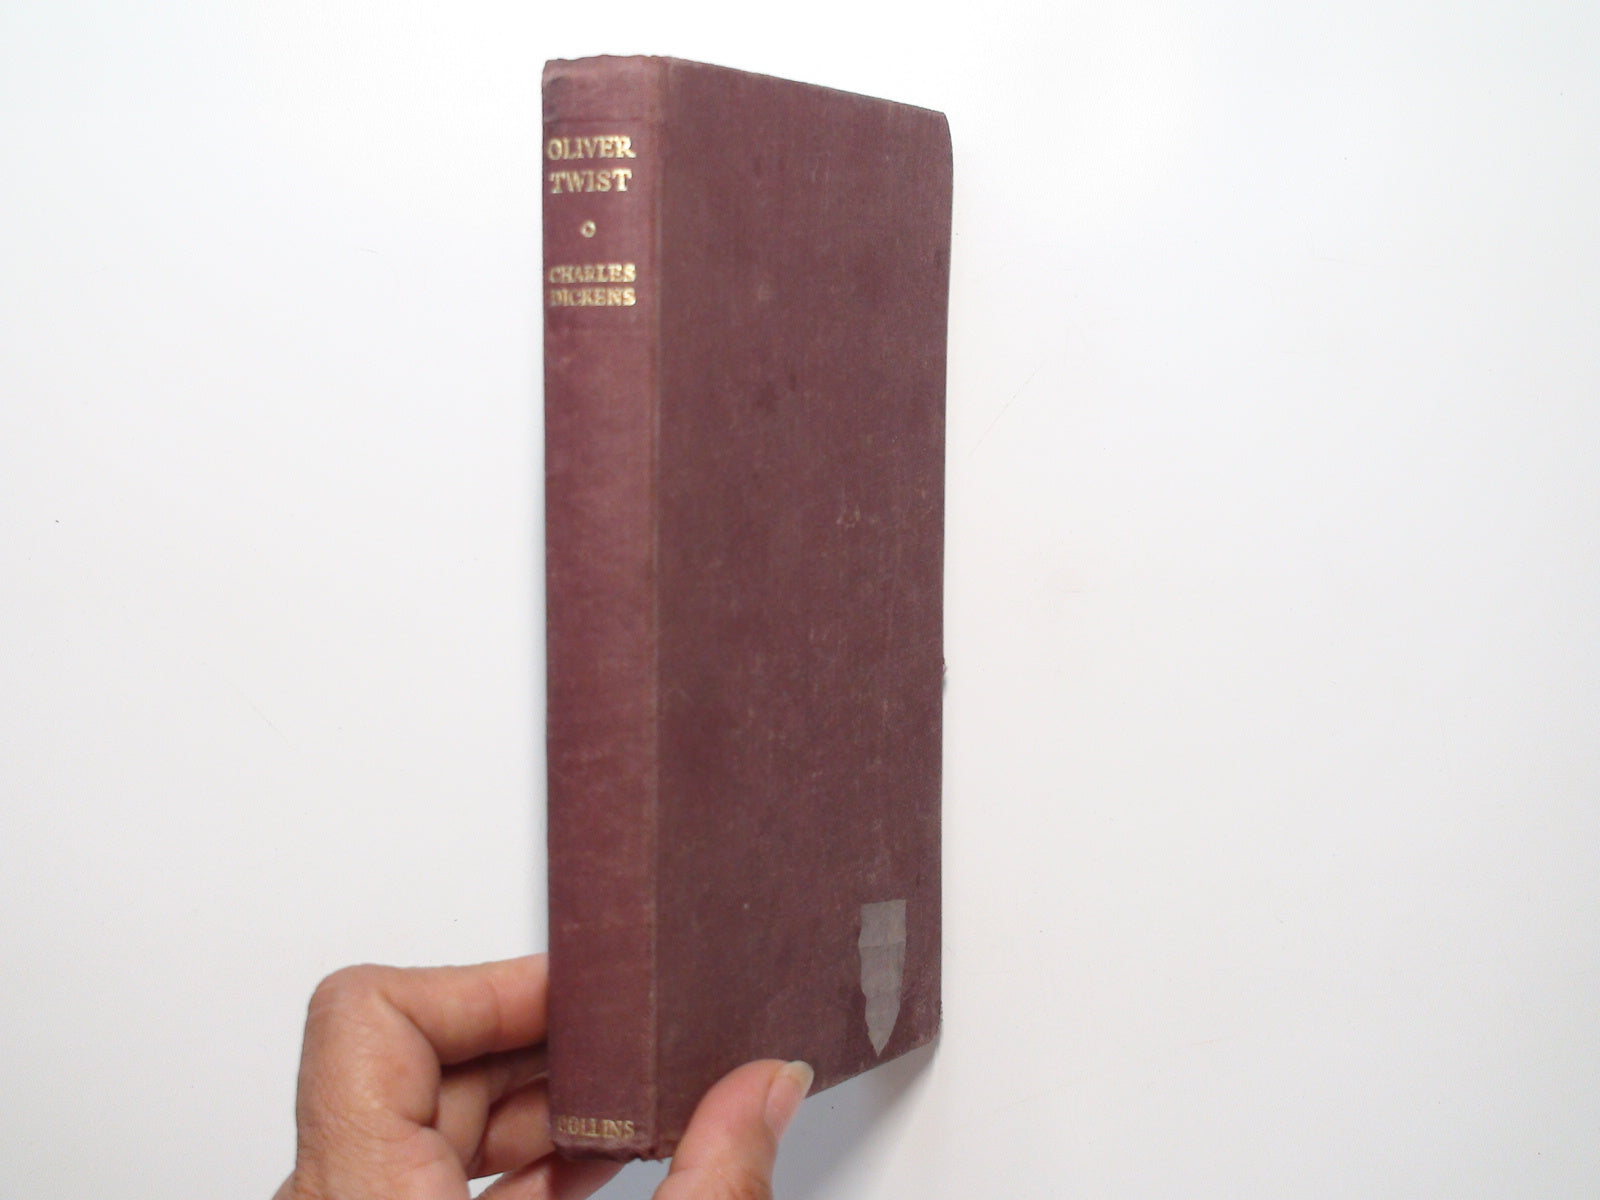 Oliver Twist, by Charles Dickens, No D/J, Collins, 1966